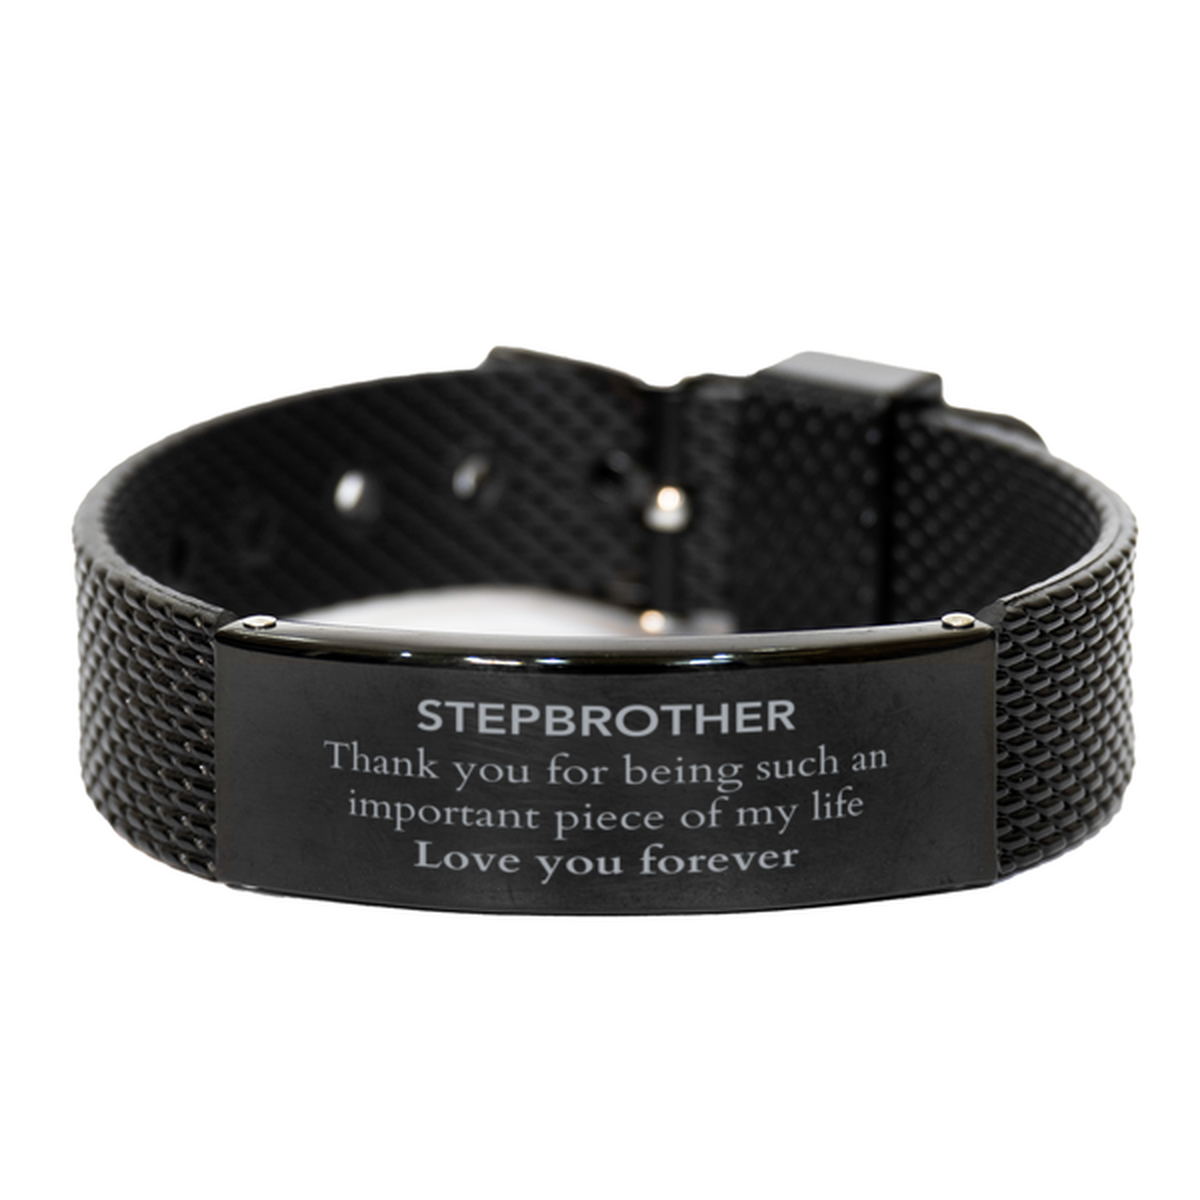 Appropriate Stepbrother Black Shark Mesh Bracelet Epic Birthday Gifts for Stepbrother Thank you for being such an important piece of my life Stepbrother Christmas Mothers Fathers Day